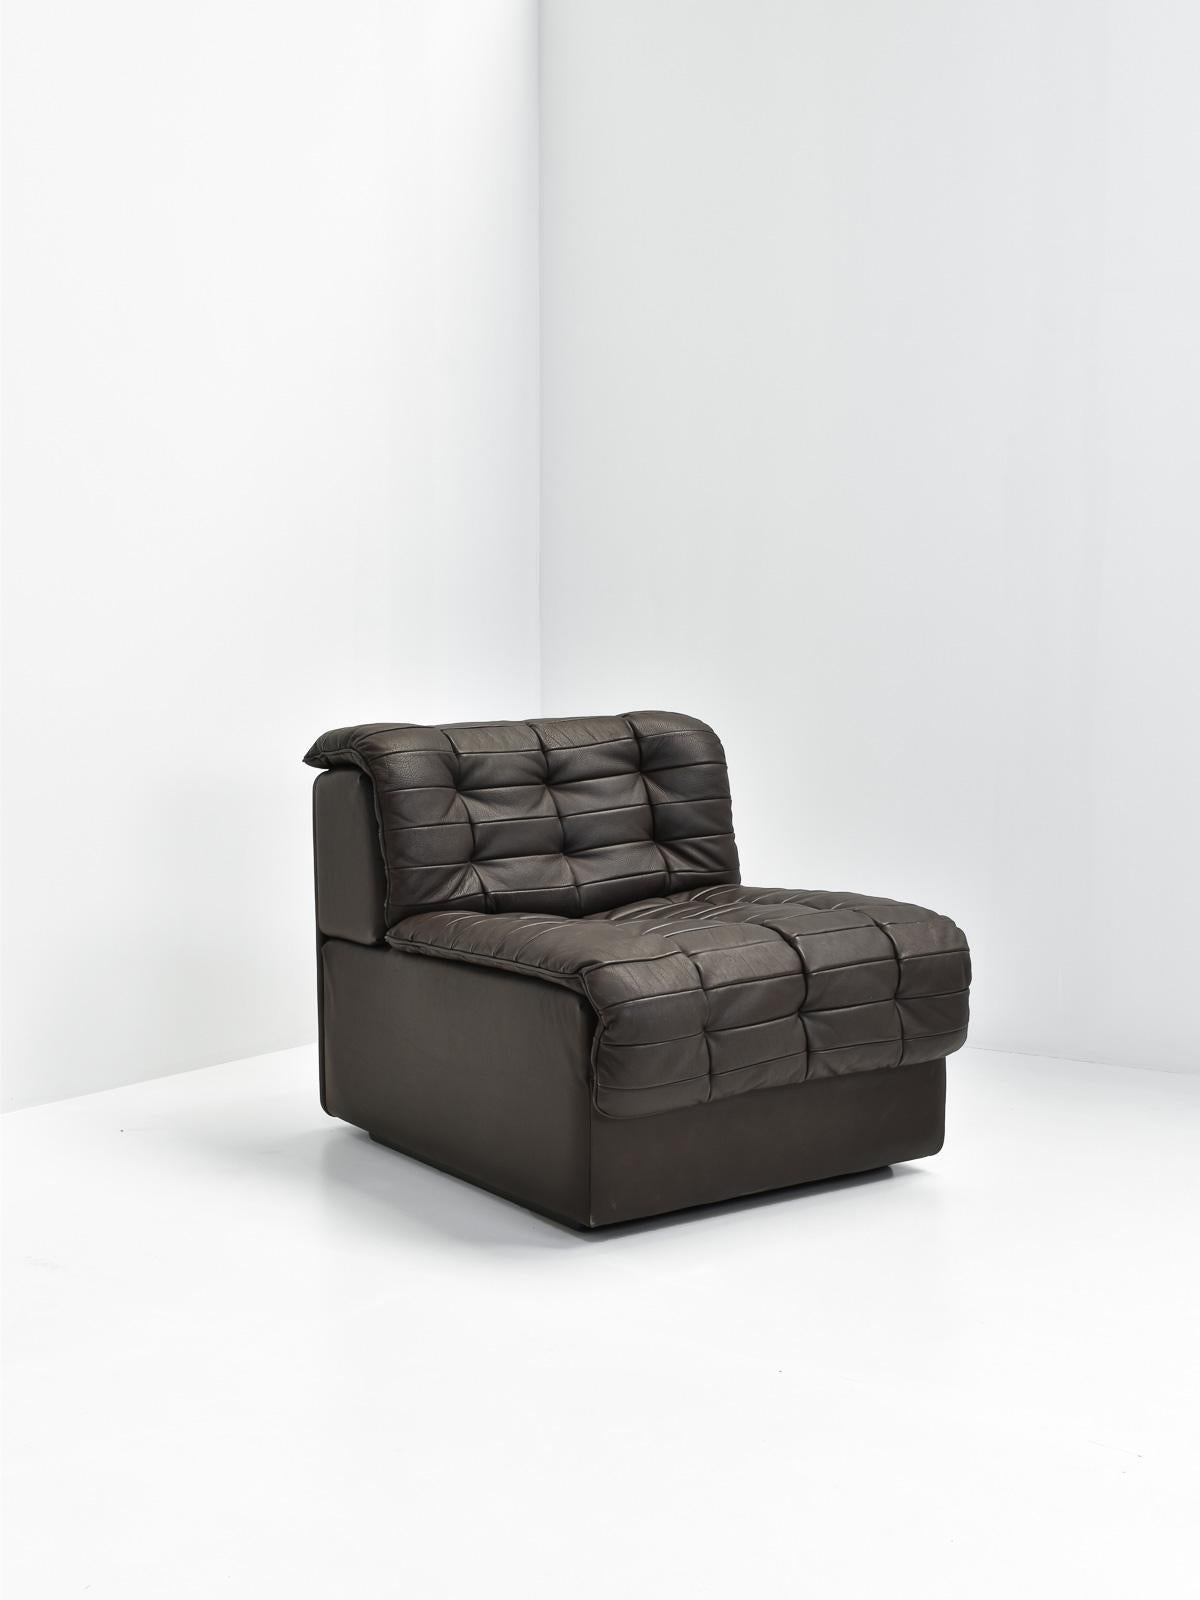 Modular Patchwork Leather Sofa by De Sede, Model 'DS11' 1